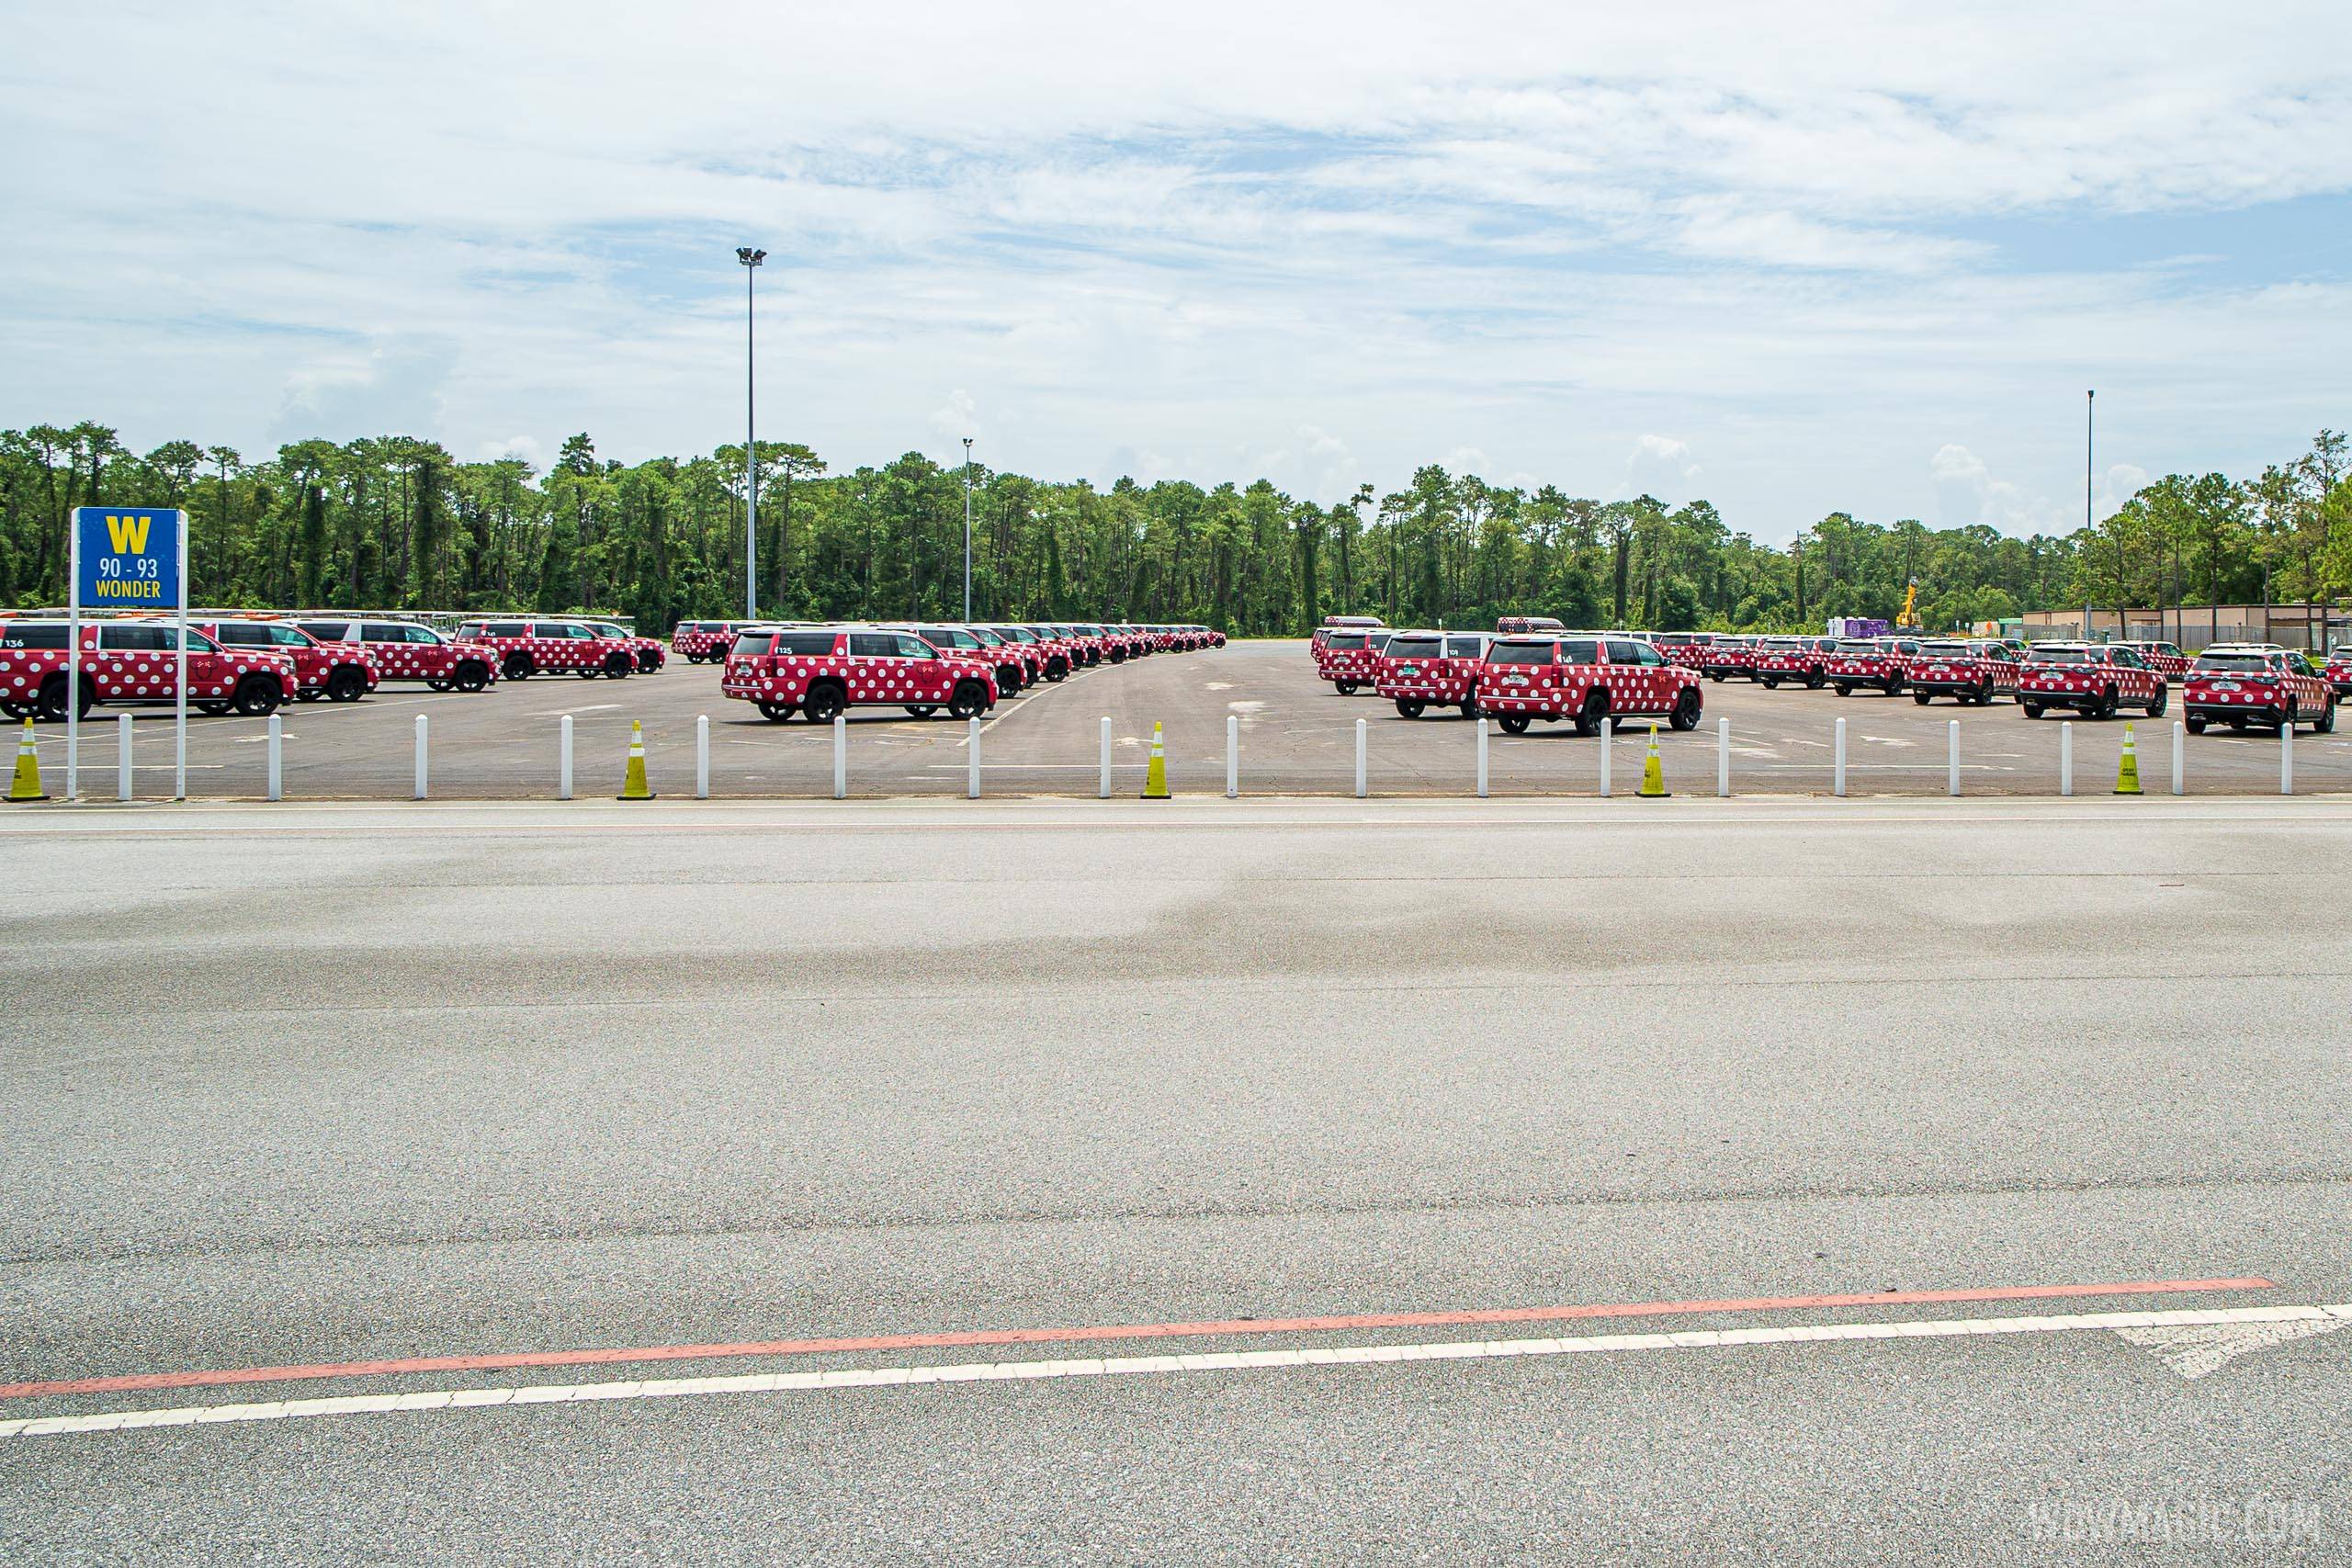 What remains of Disney's Minnie Van fleet is parked at EPCOT